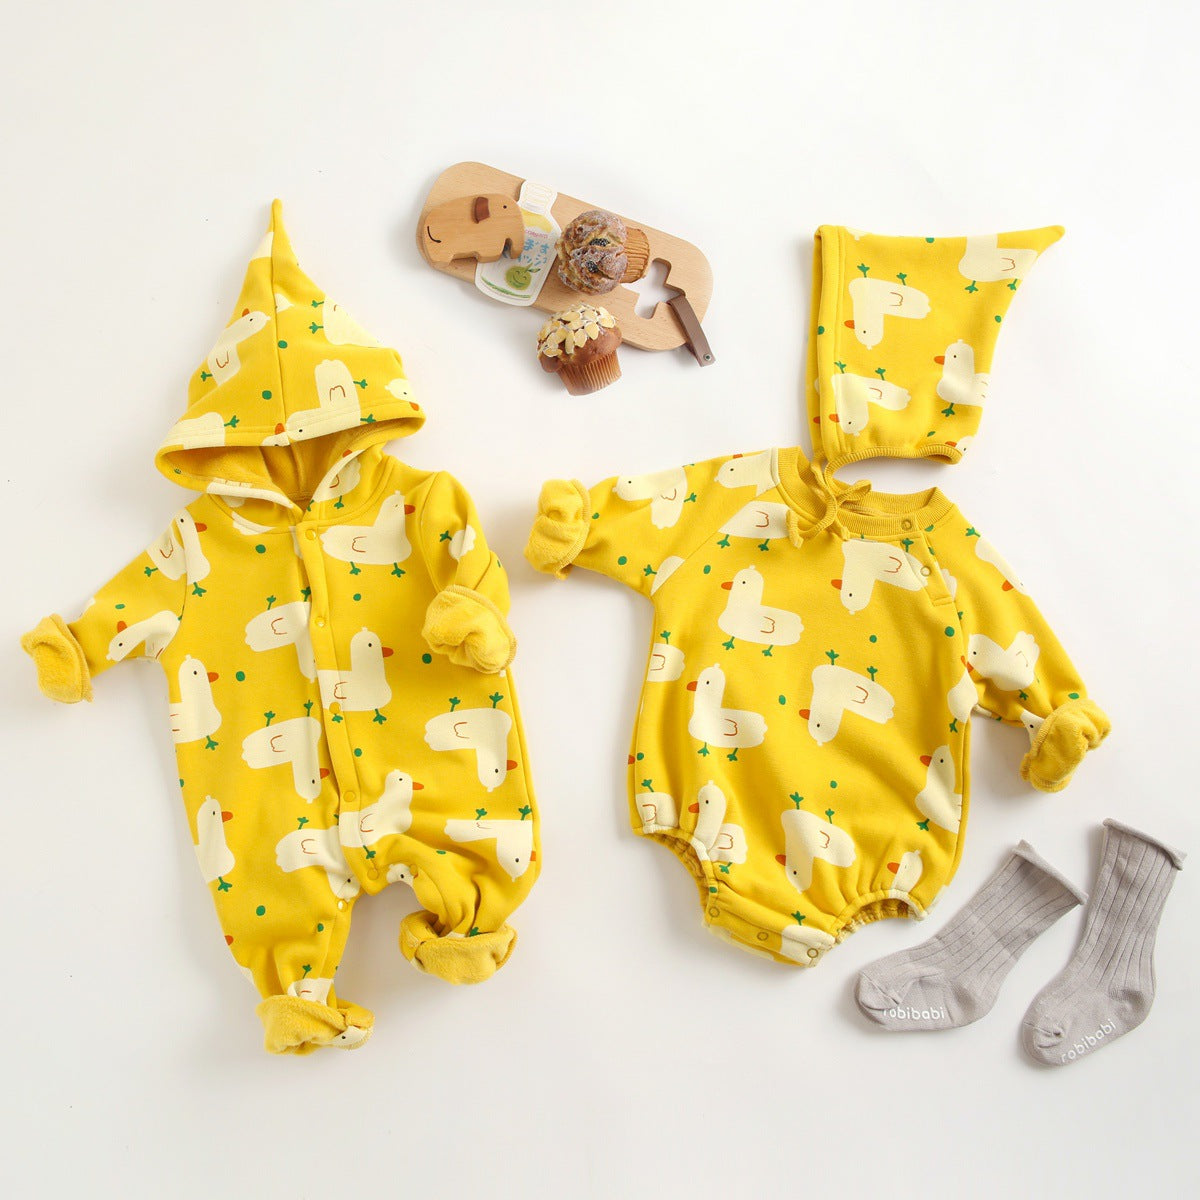 Baby 1pcs Cartoon Duck Print Button Front Rompers & Onesies With Triangle Hats My Kids-USA